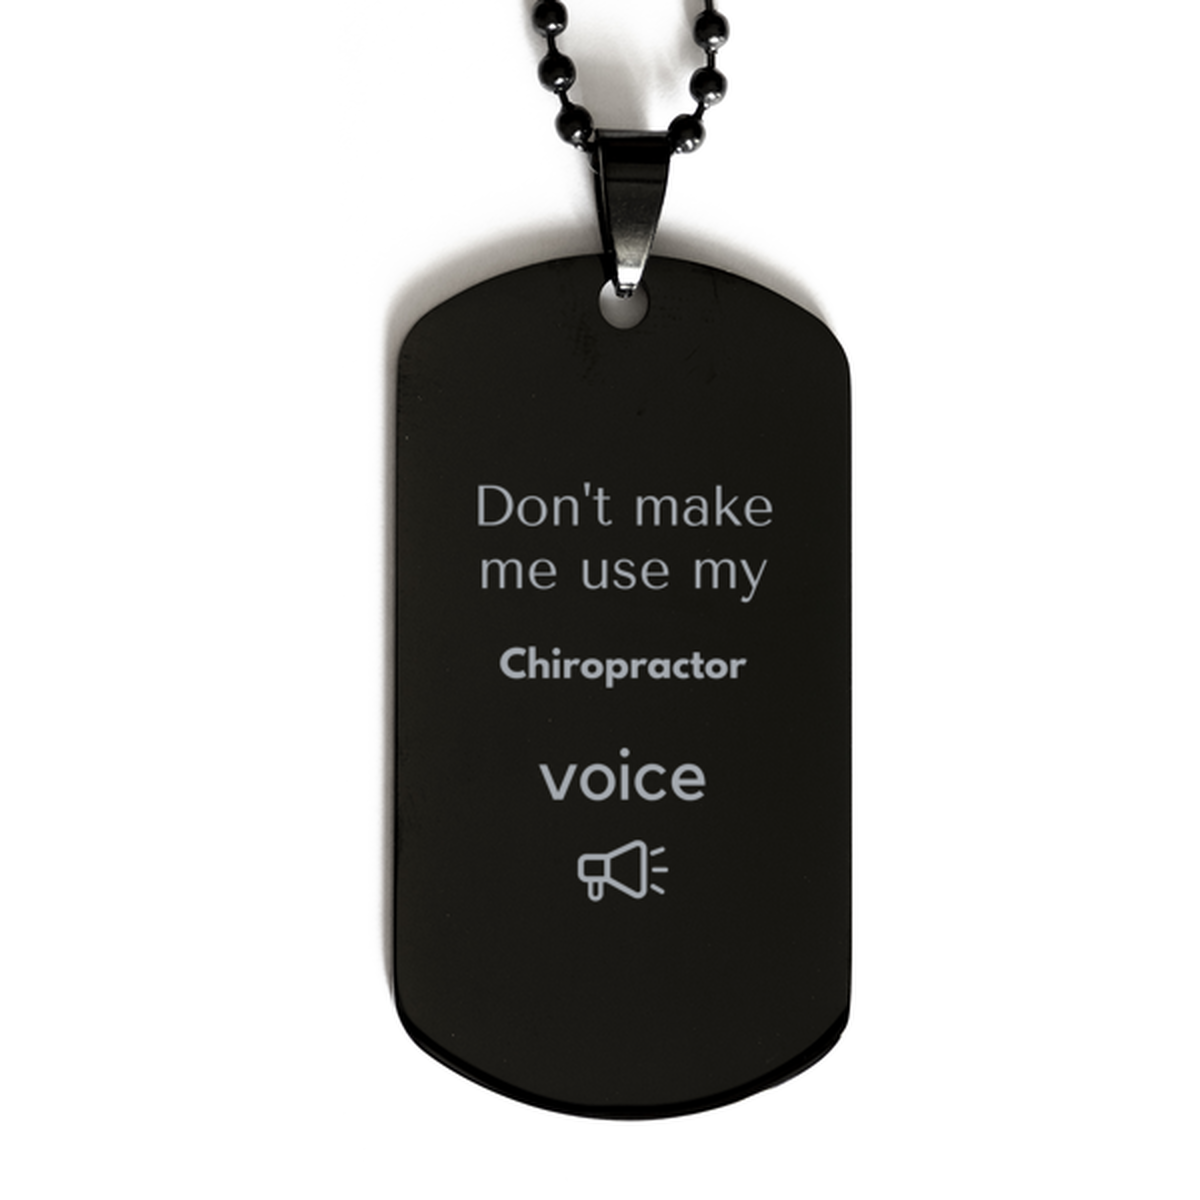 Don't make me use my Chiropractor voice, Sarcasm Chiropractor Gifts, Christmas Chiropractor Black Dog Tag Birthday Unique Gifts For Chiropractor Coworkers, Men, Women, Colleague, Friends